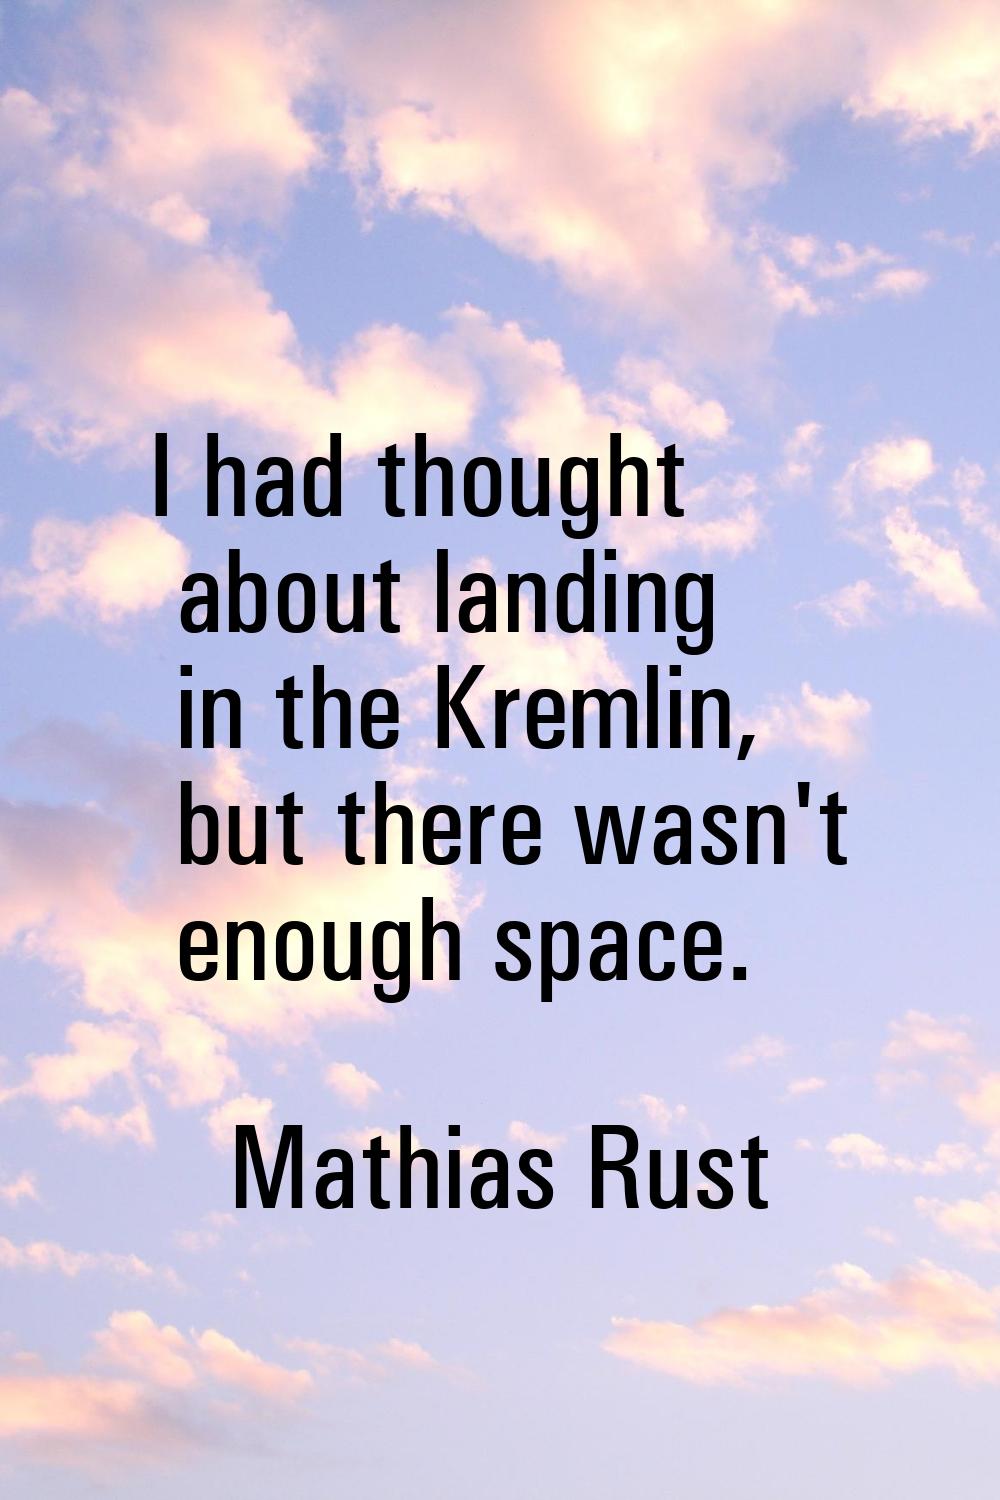 I had thought about landing in the Kremlin, but there wasn't enough space.